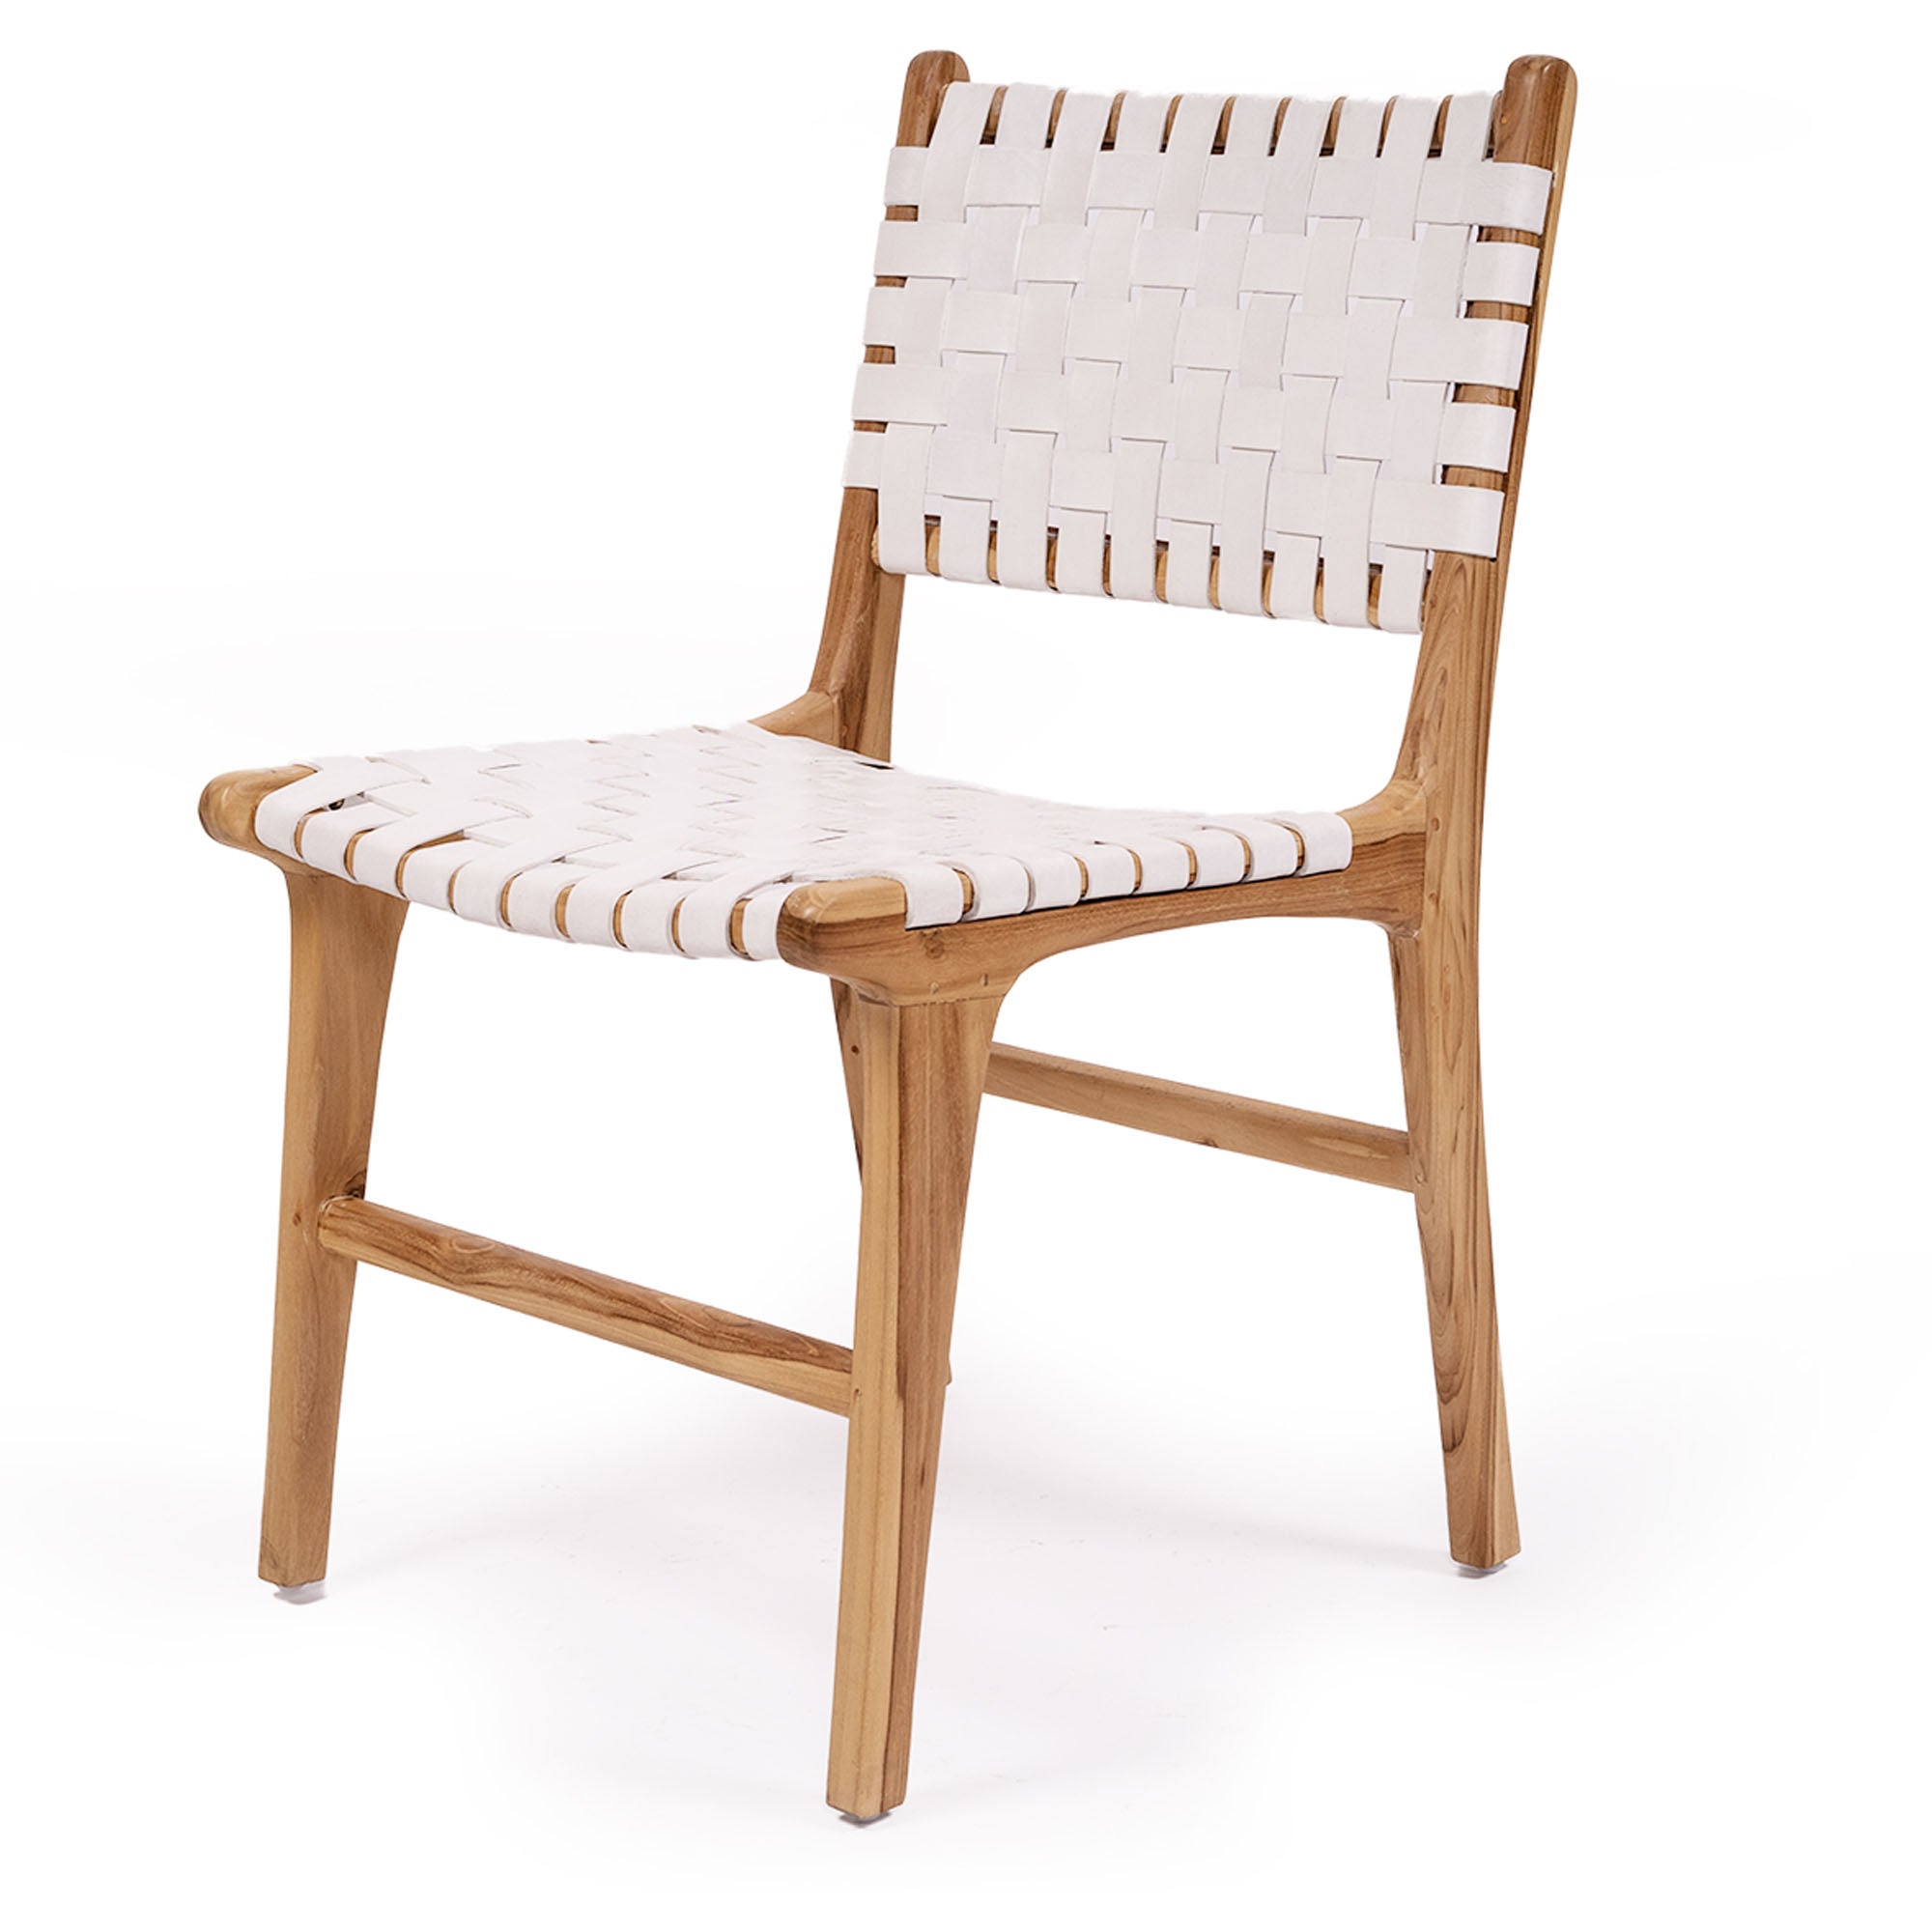 Jubilee Woven Leather Dining Chair - White - Notbrand